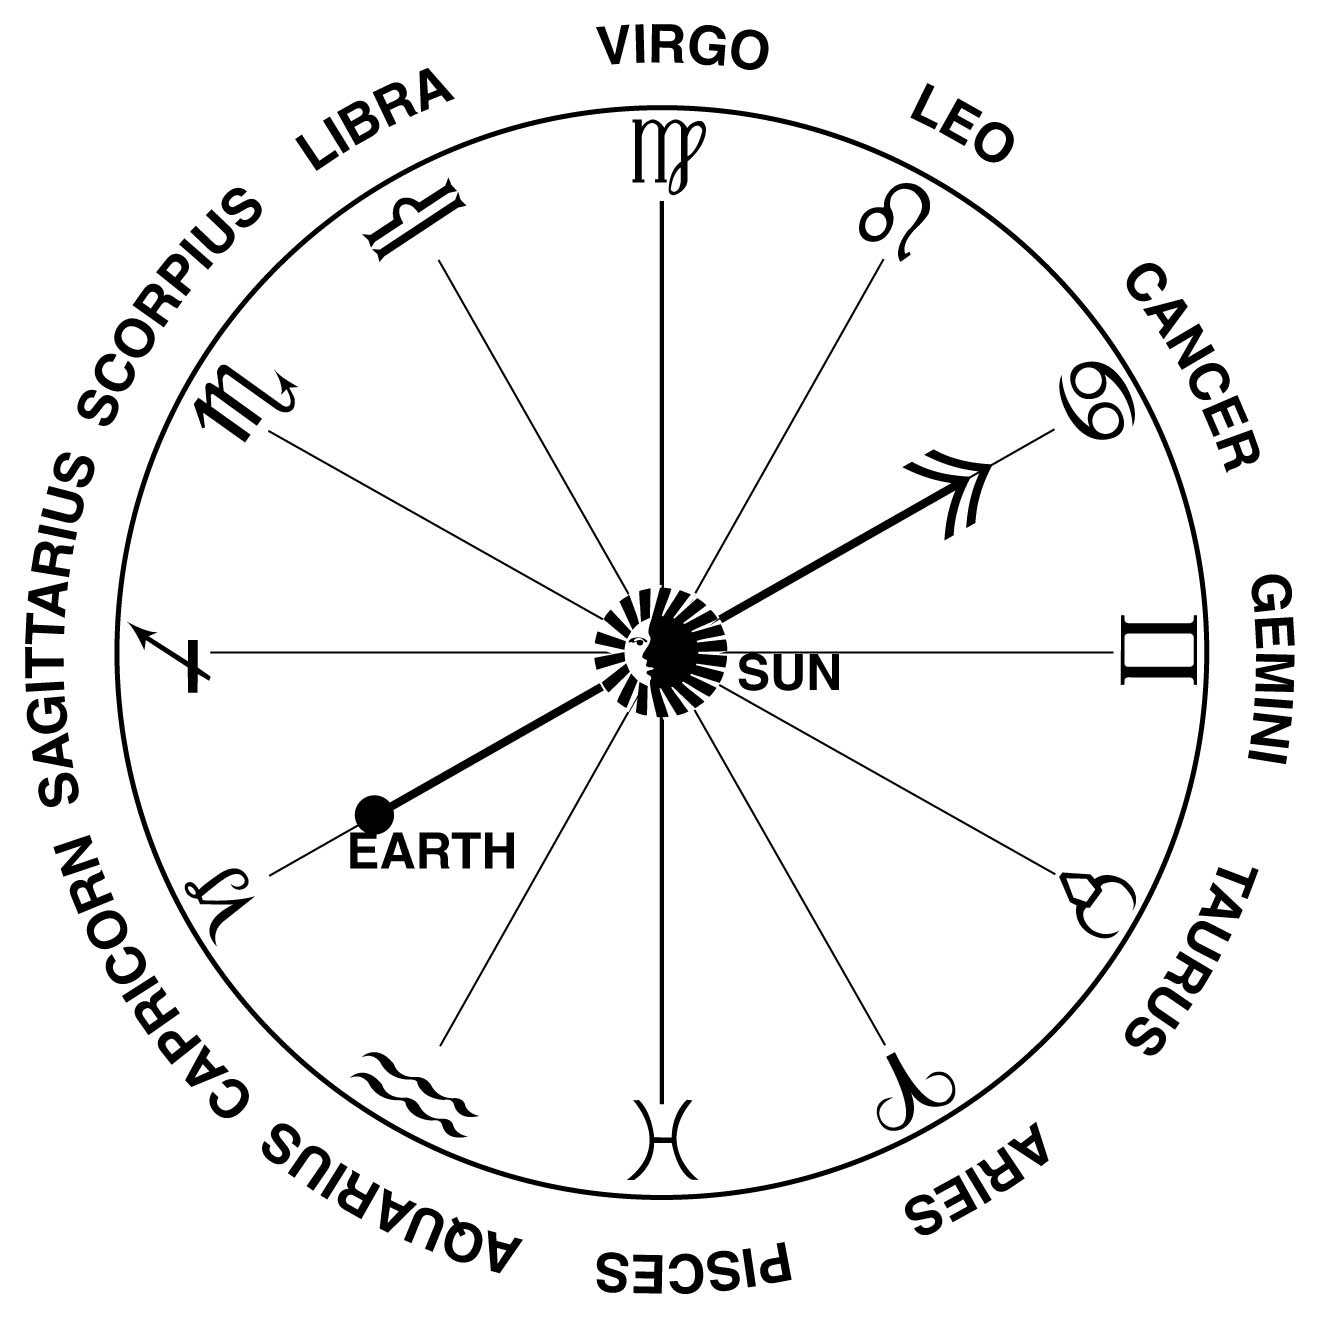 Zodiac Signs And Their Dates - Universe Today The Zodiac Calendar Dates